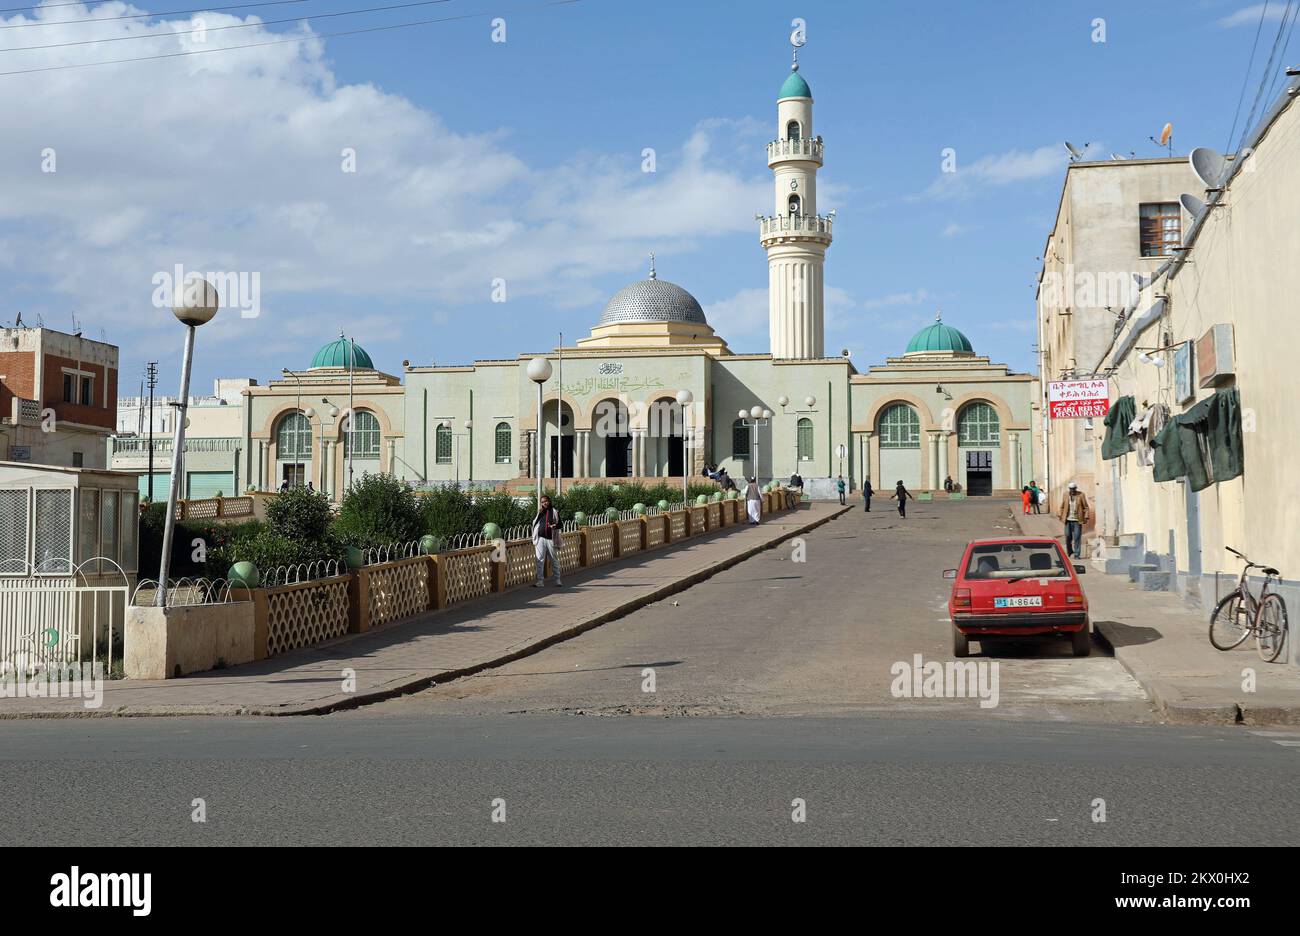 Great Mosque of Asmara designed by Guido Ferrazza and built by the Italians in the 1930s Stock Photo